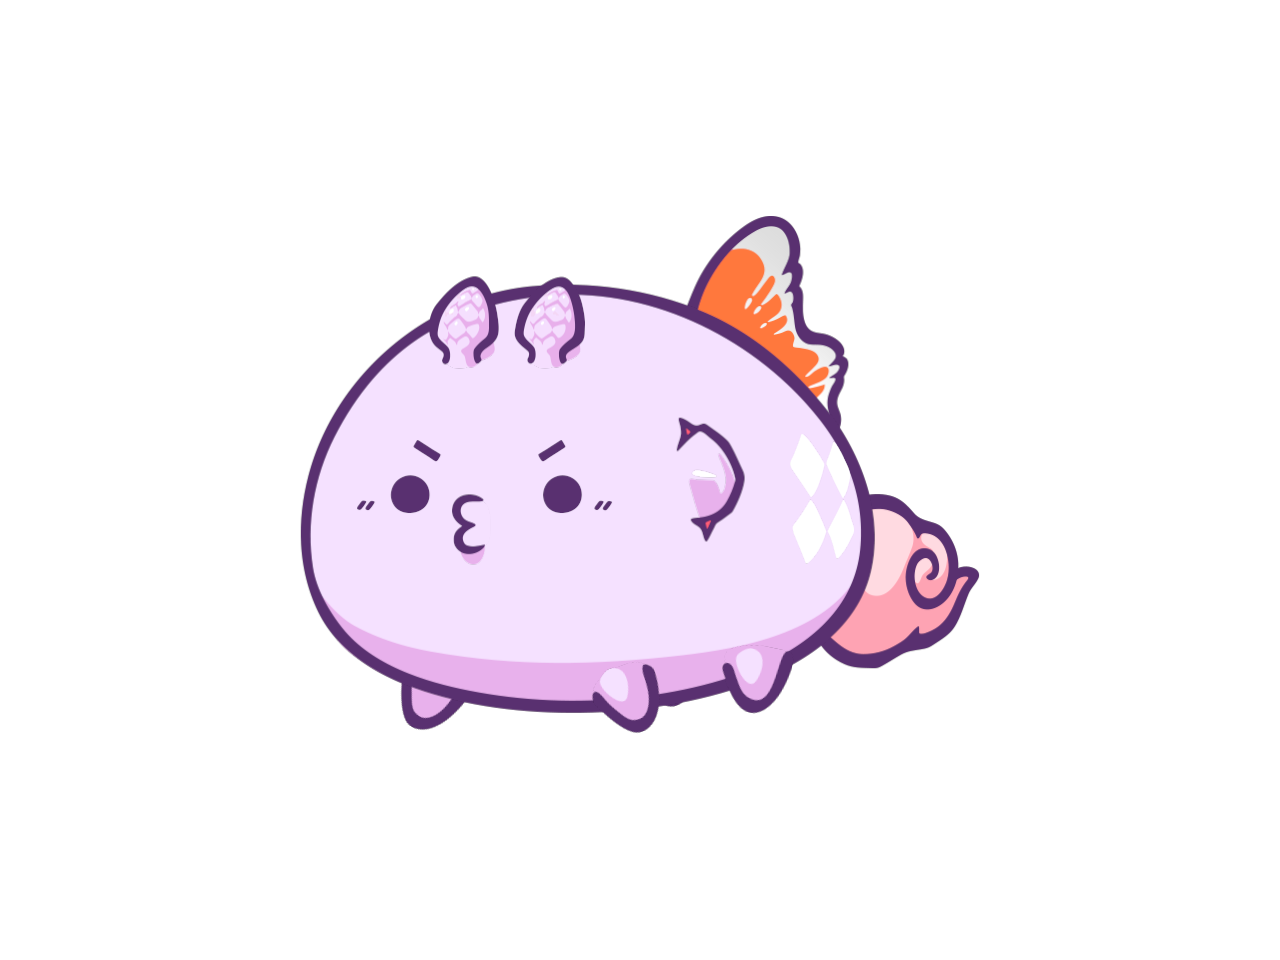 Axie #11824650 READY TO ASCEND 9LVL